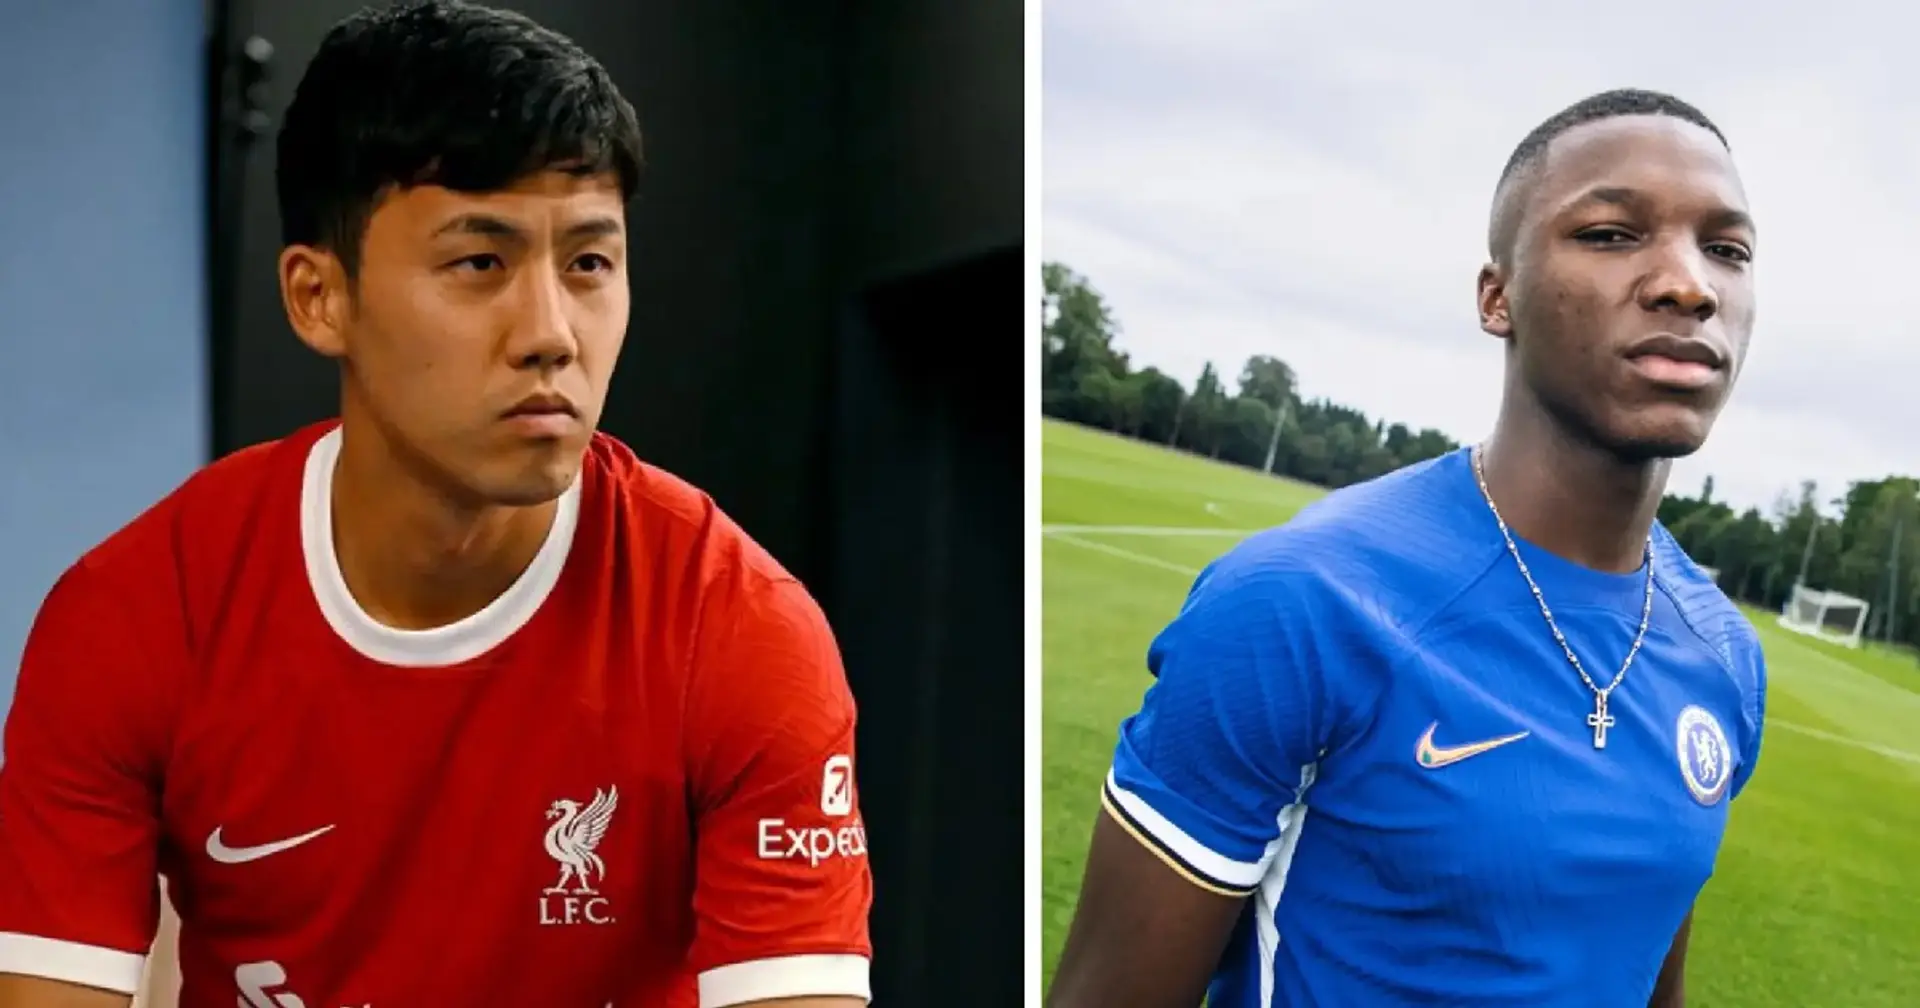 Endo shares his thoughts on being Liverpool's 'Plan B' after failed Caicedo deal